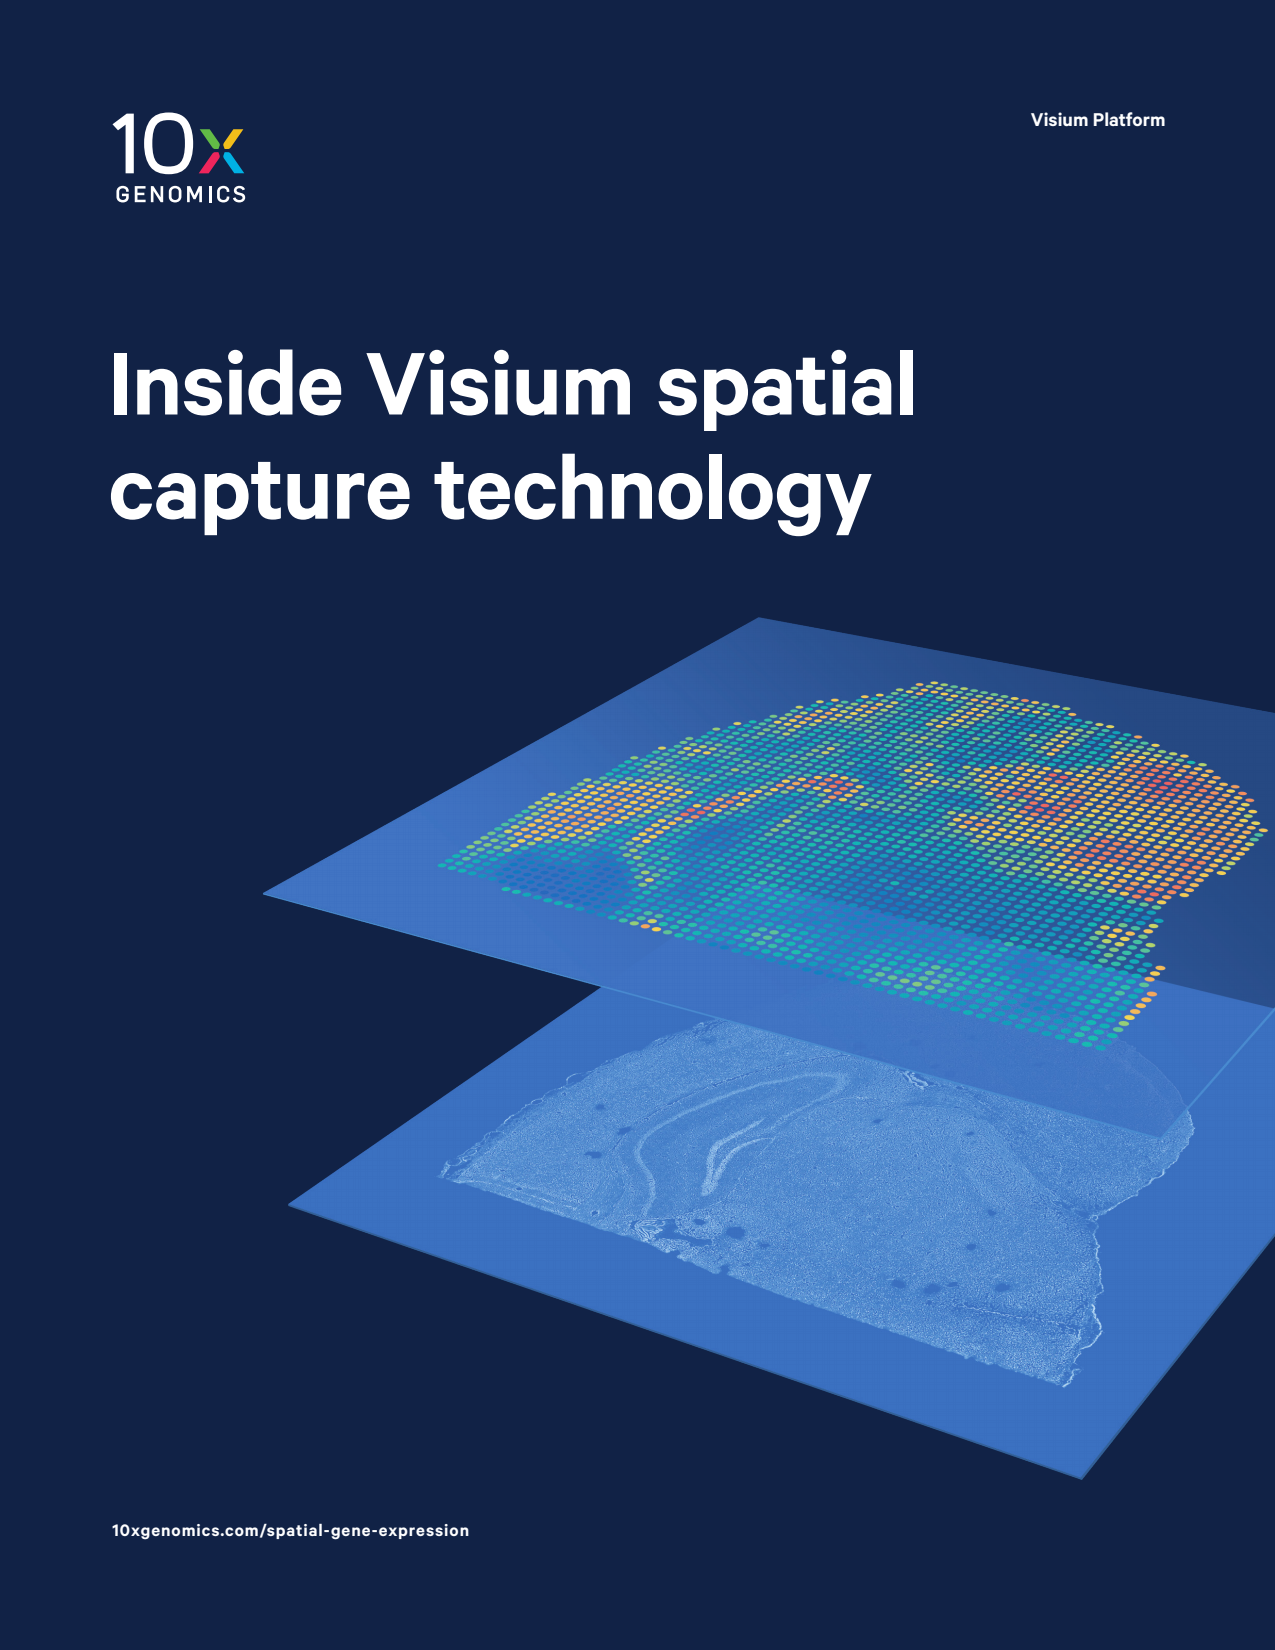 Inside Visium Spatial Technology